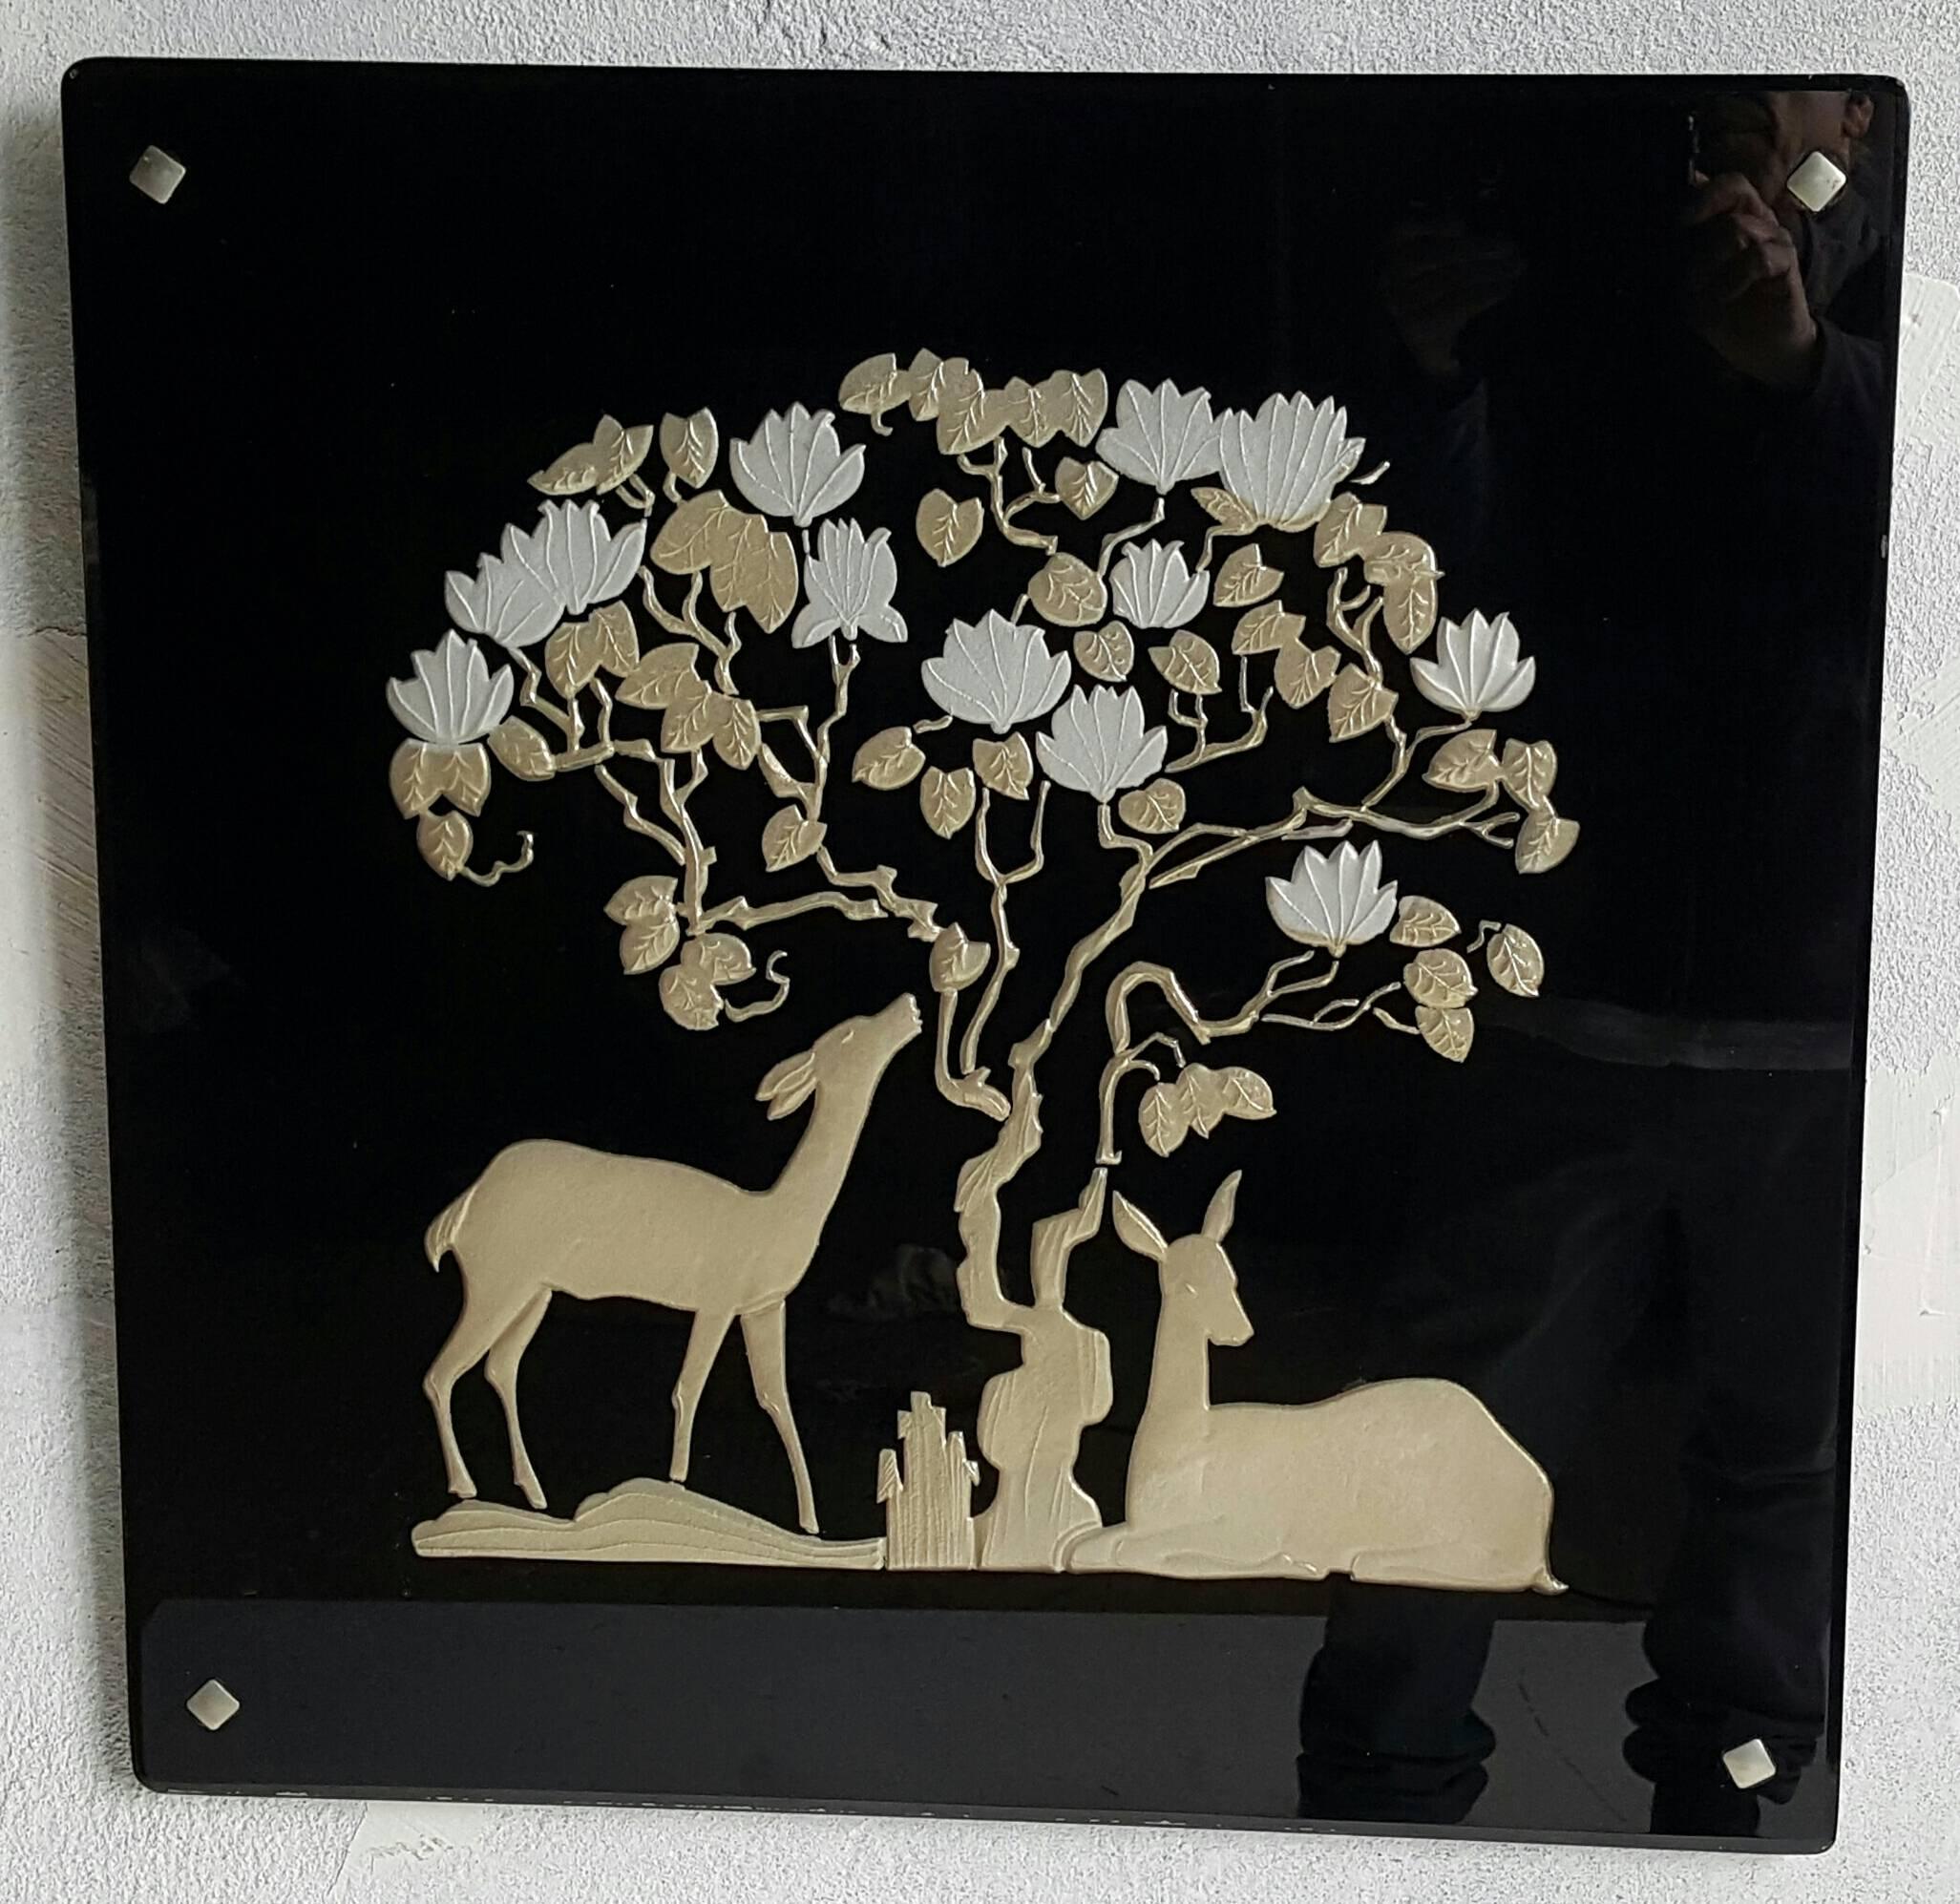 Seldom seen Art Deco black glass mirror (vitrolite), circa 1930s, beautifully reversed decorated with wonderful flowering tree and deer motif. Retain original nickeled square grommets, remarkable original condition, free of scratches, chips etc.